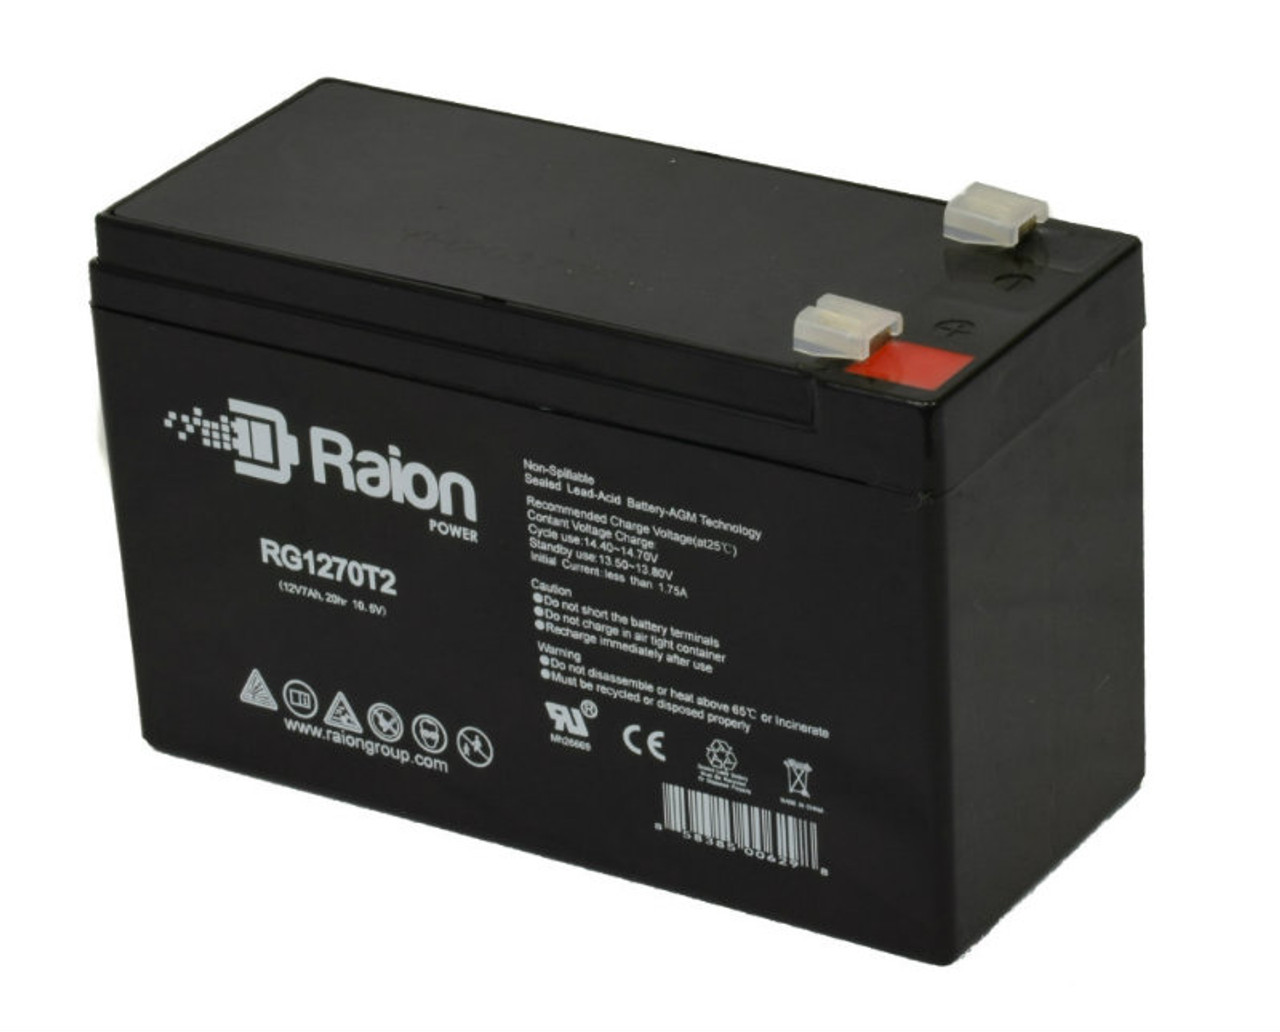 Raion Power Replacement RG1270T1 Battery for Harmar RP350 Alpine II Standard Stairlift